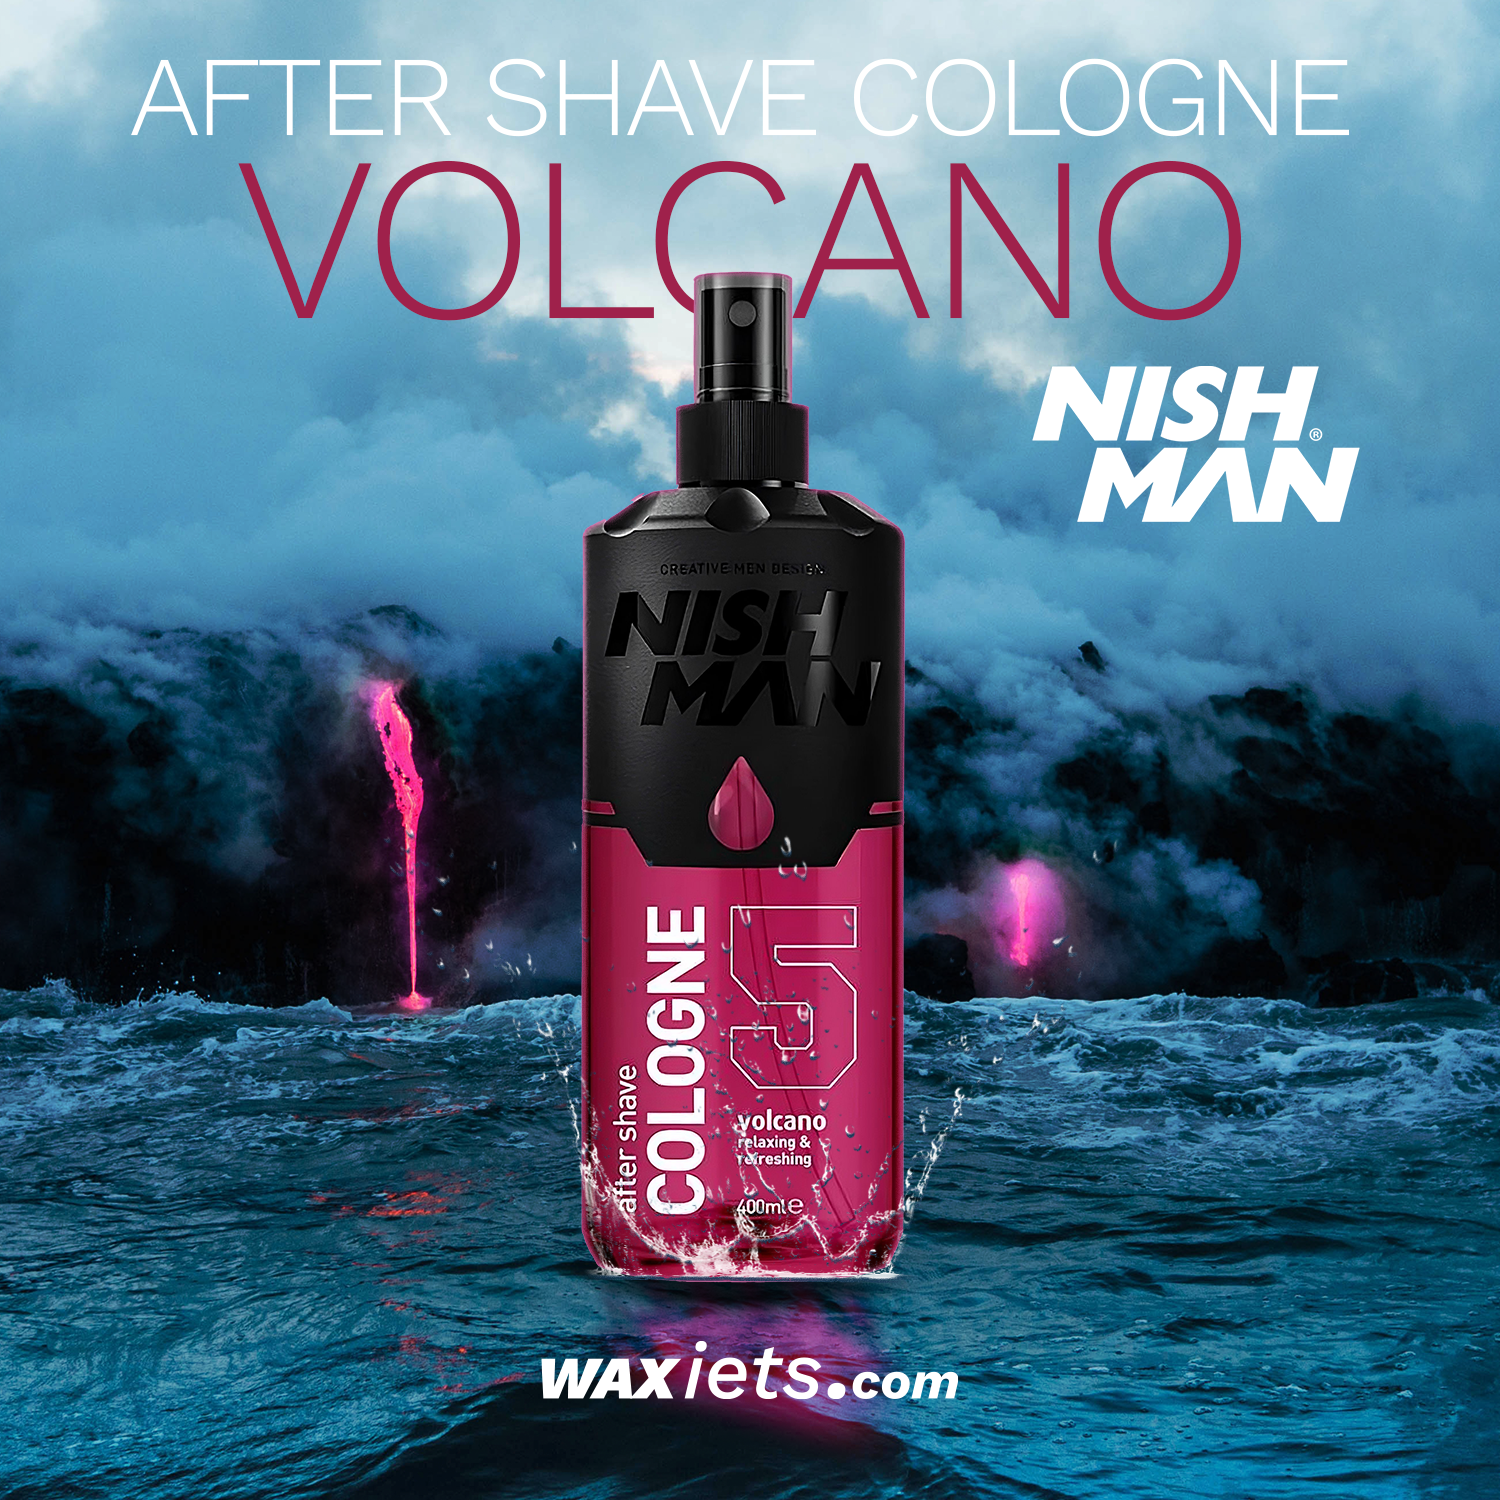 NISH MAN – After Shave Cologne Volcano 5 – 400ml